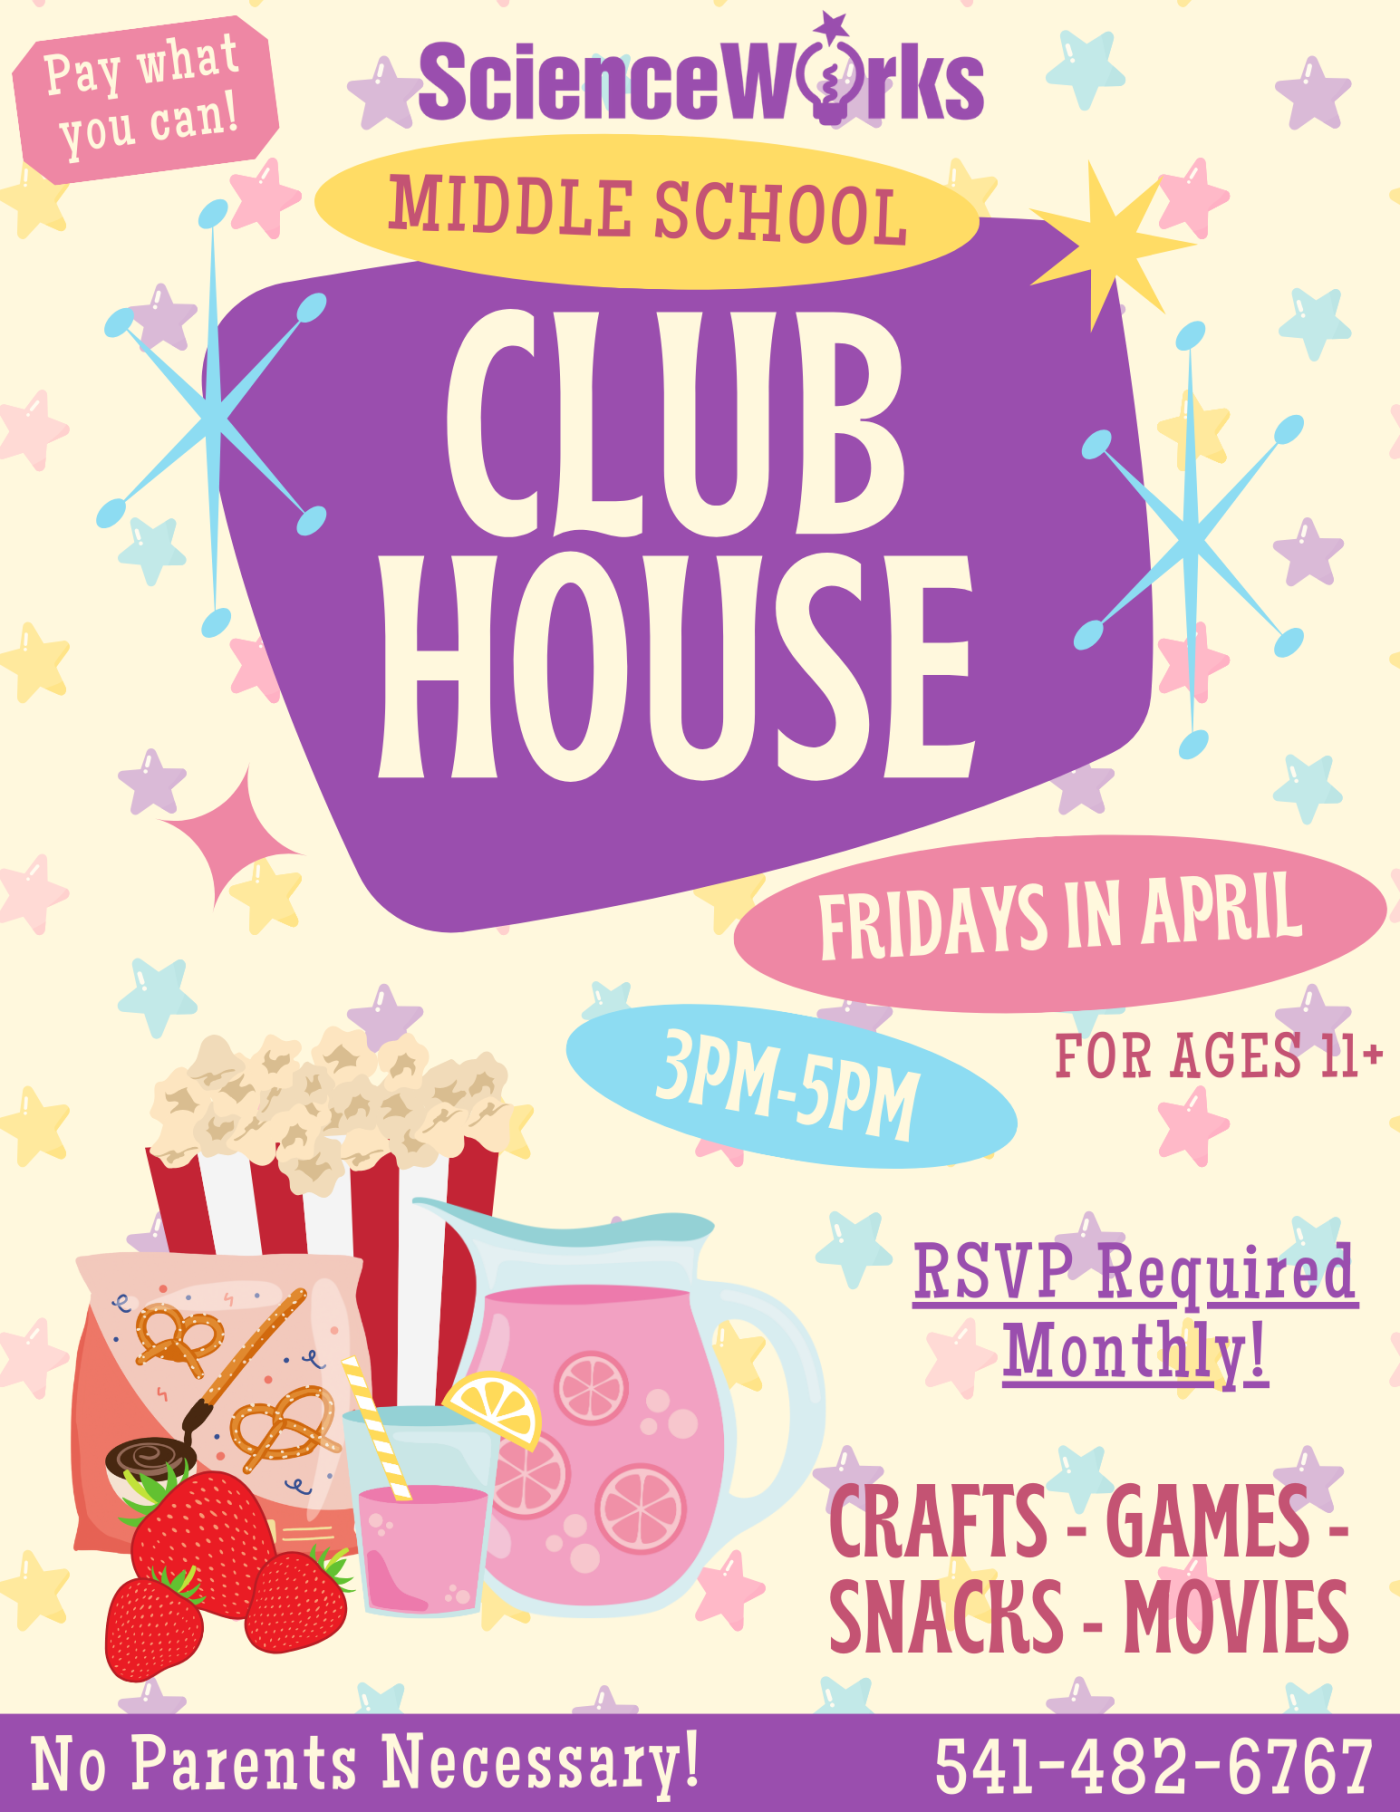 Middle School Club House in April. Friday April 5, 12, 19, 26. 3 - 5 pm